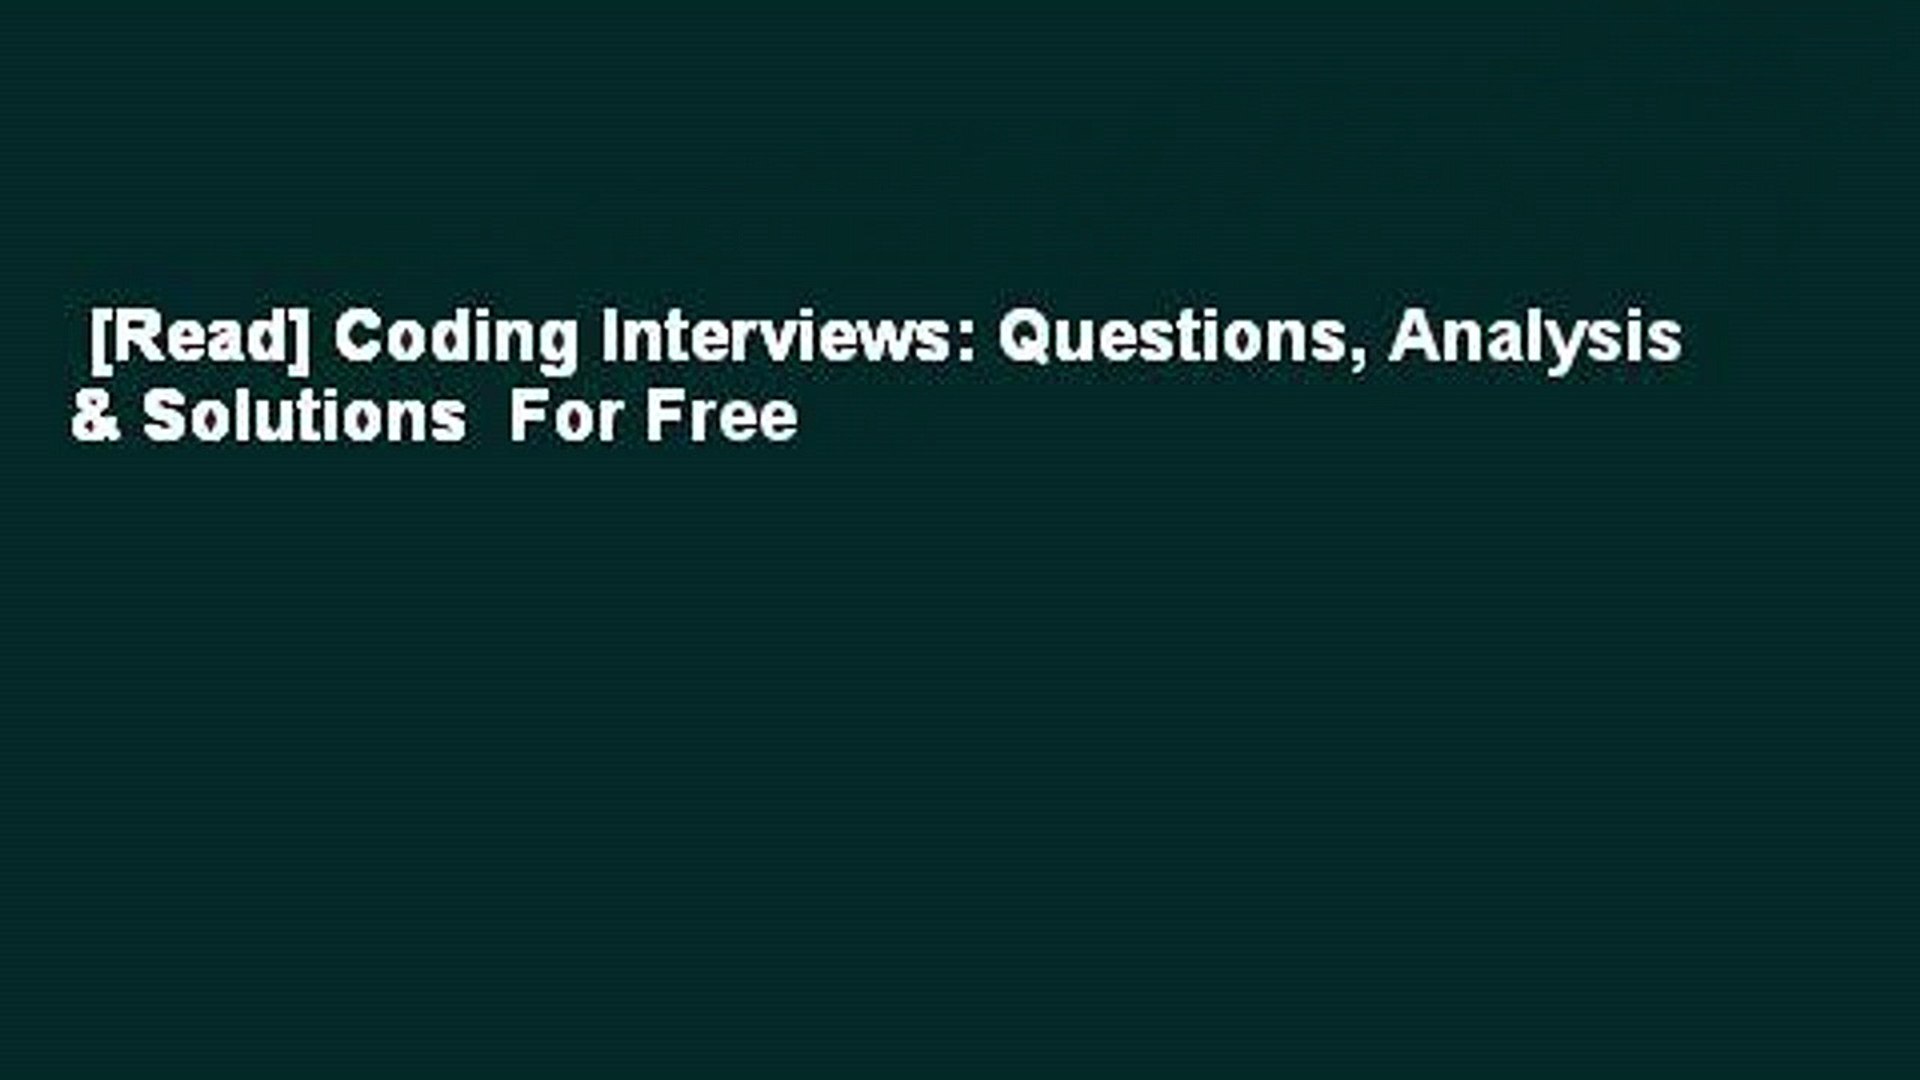 [Read] Coding Interviews: Questions, Analysis & Solutions  For Free